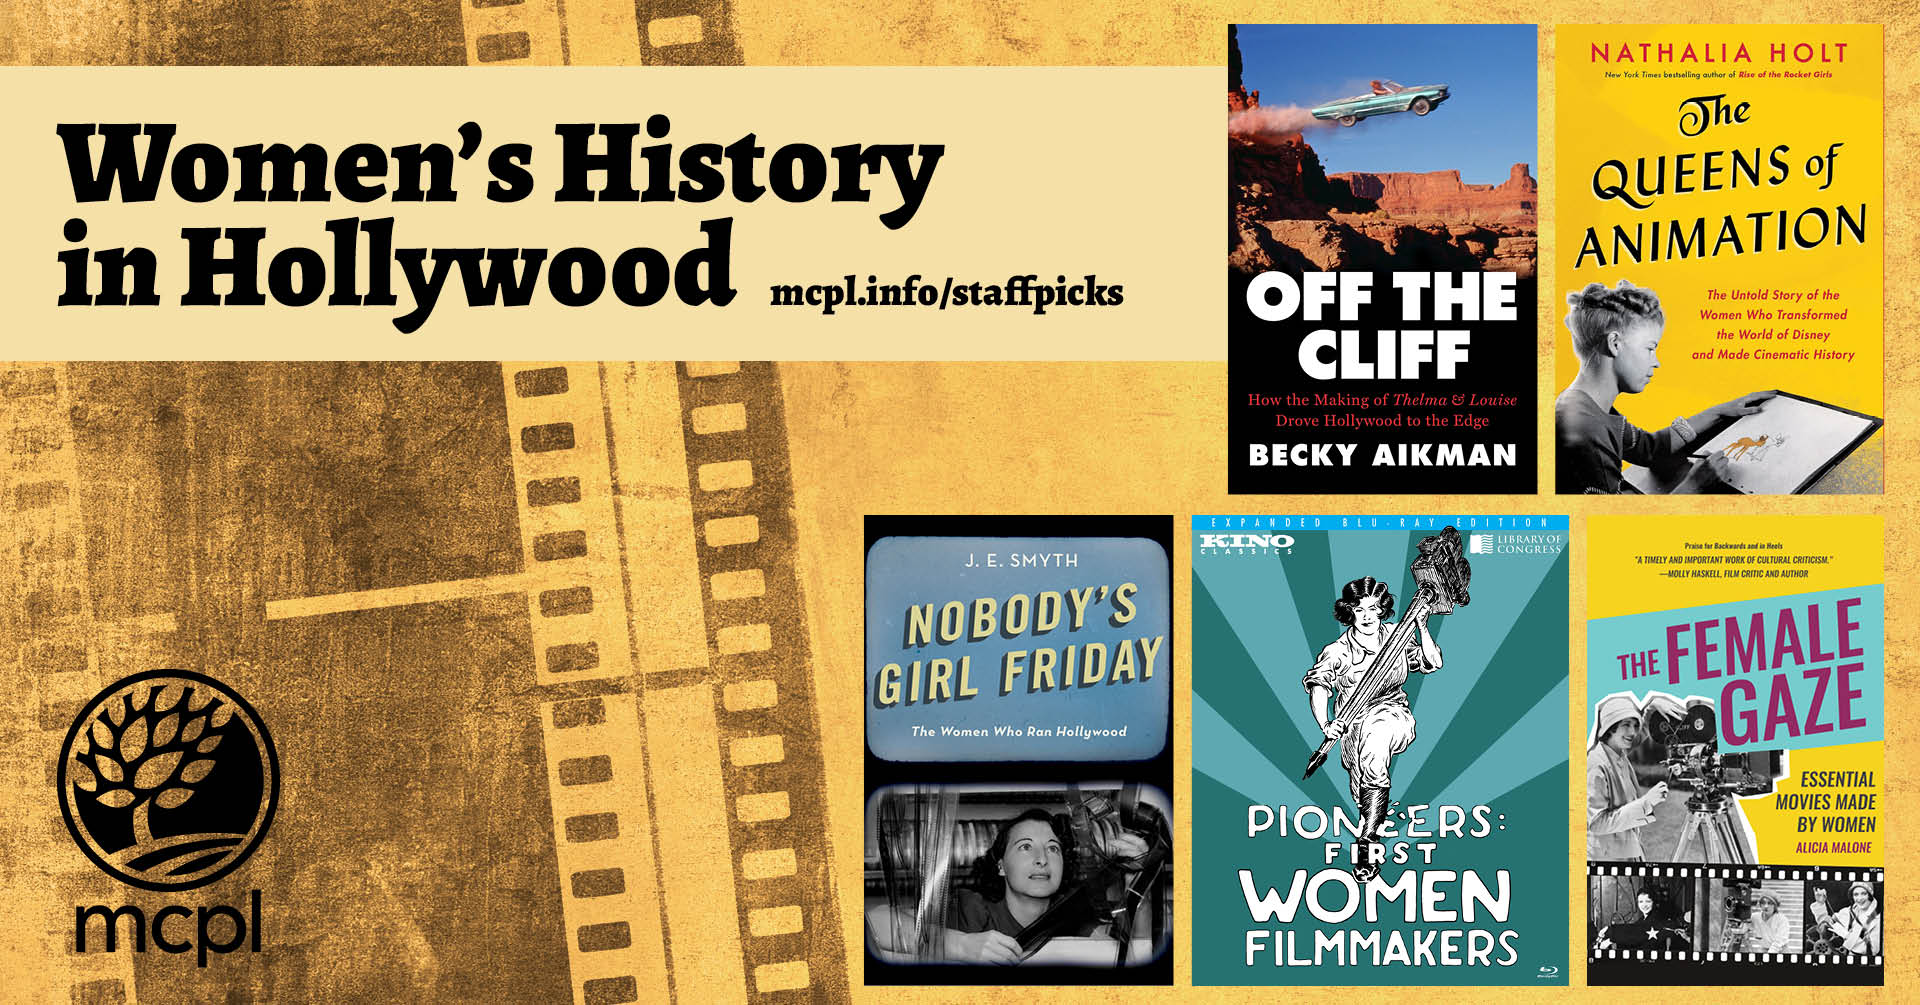 Covers of books about Women's history in Hollywood over a sepia colored film background.